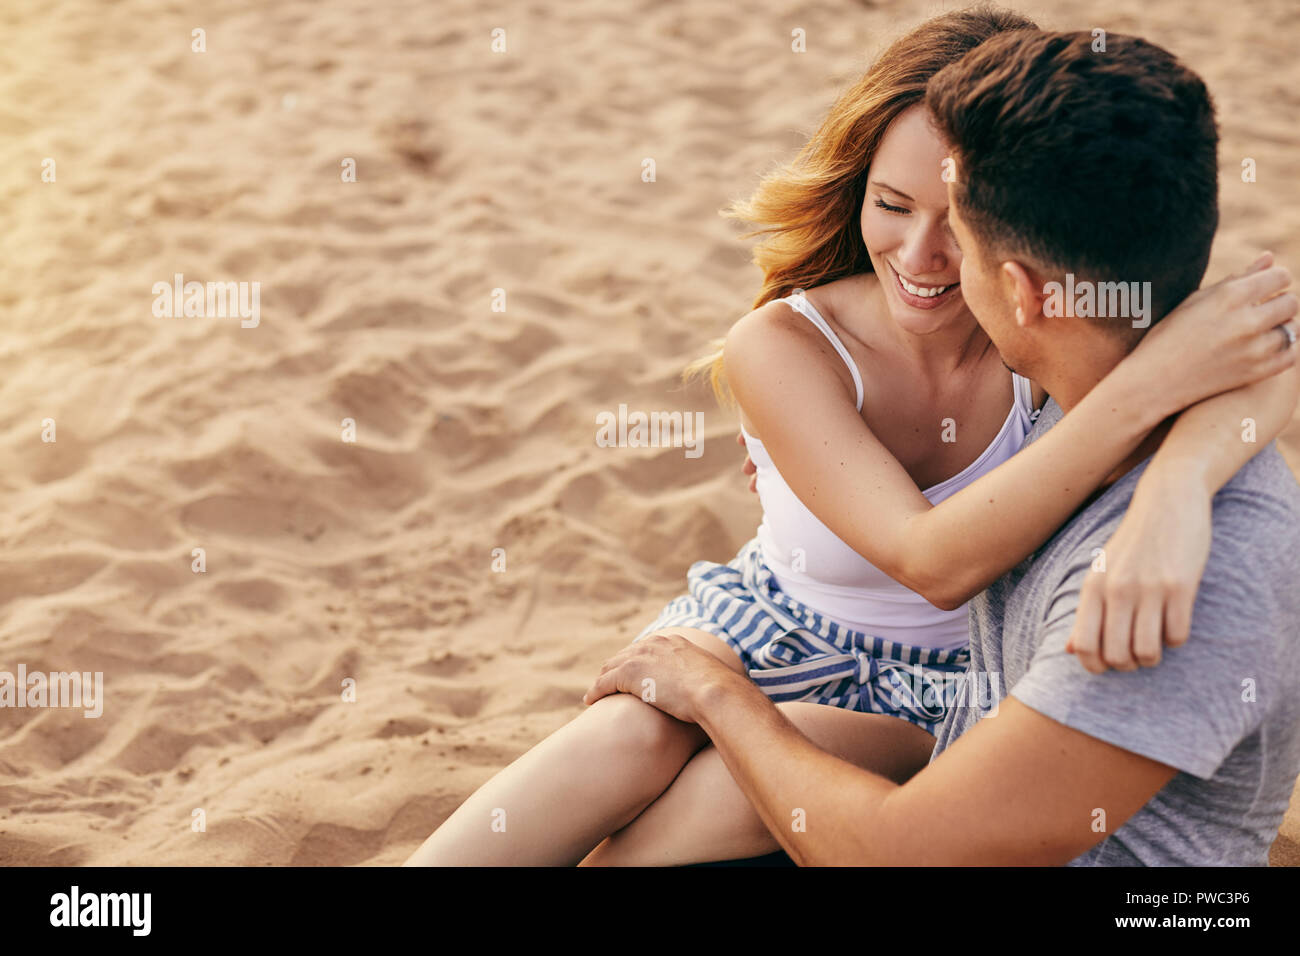 Romantic young couple sitting arm in arm together on a sandy beach watching the sunset Stock Photo